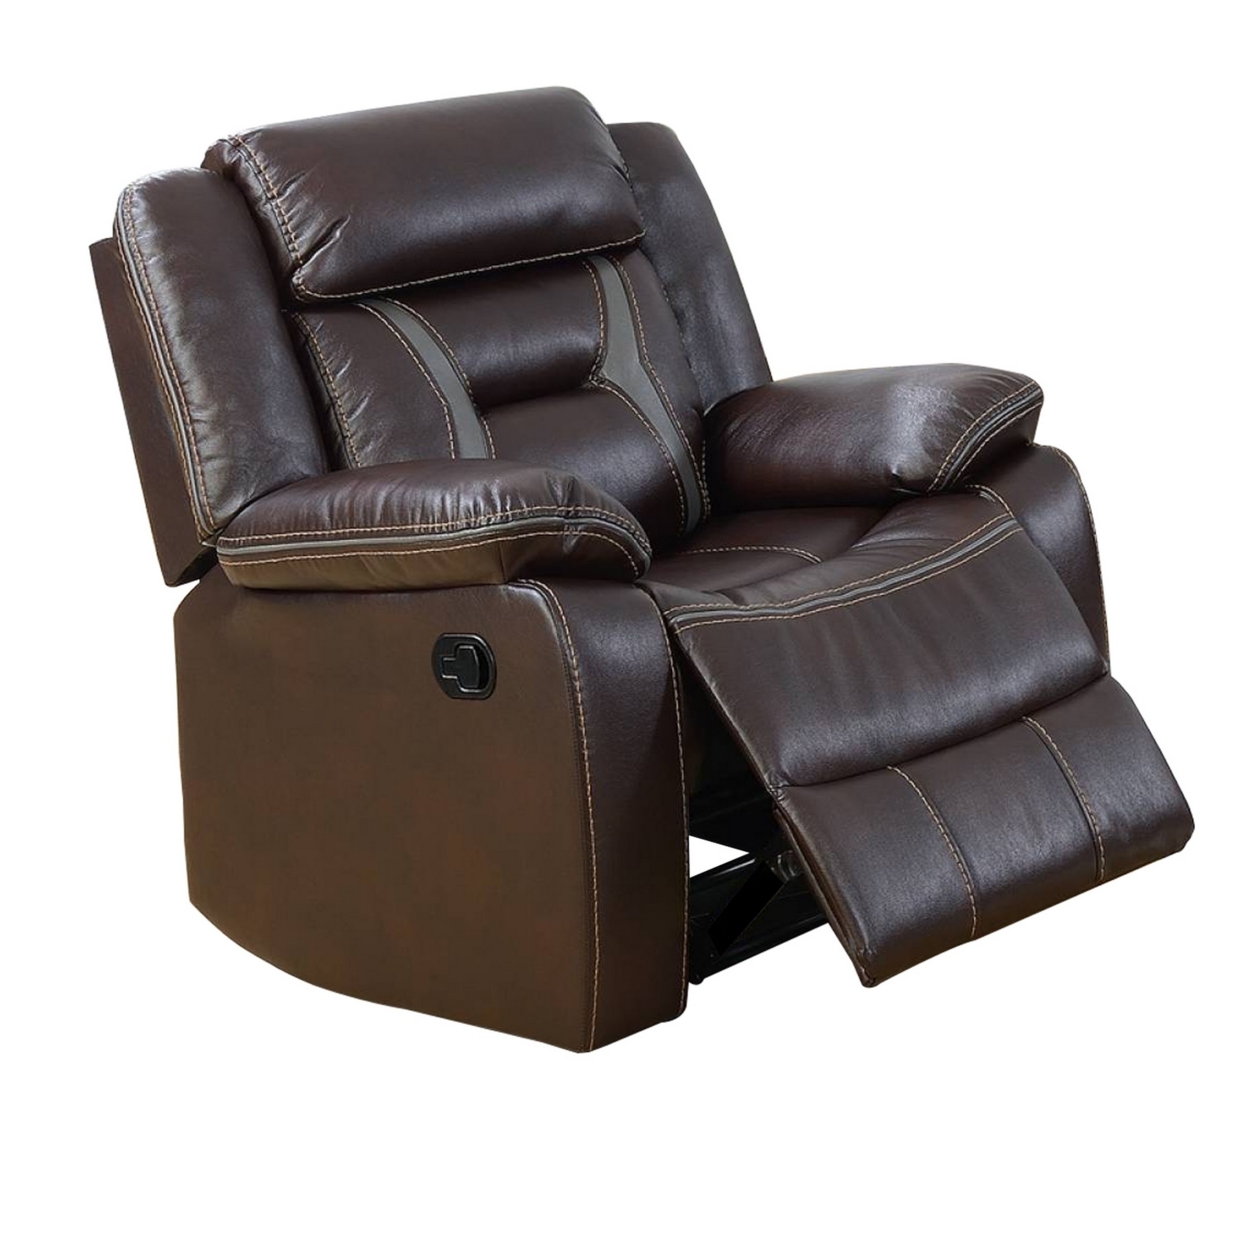 37 Inches Leatherette Glider Recliner With Pillow Arms, Dark Brown- Saltoro Sherpi